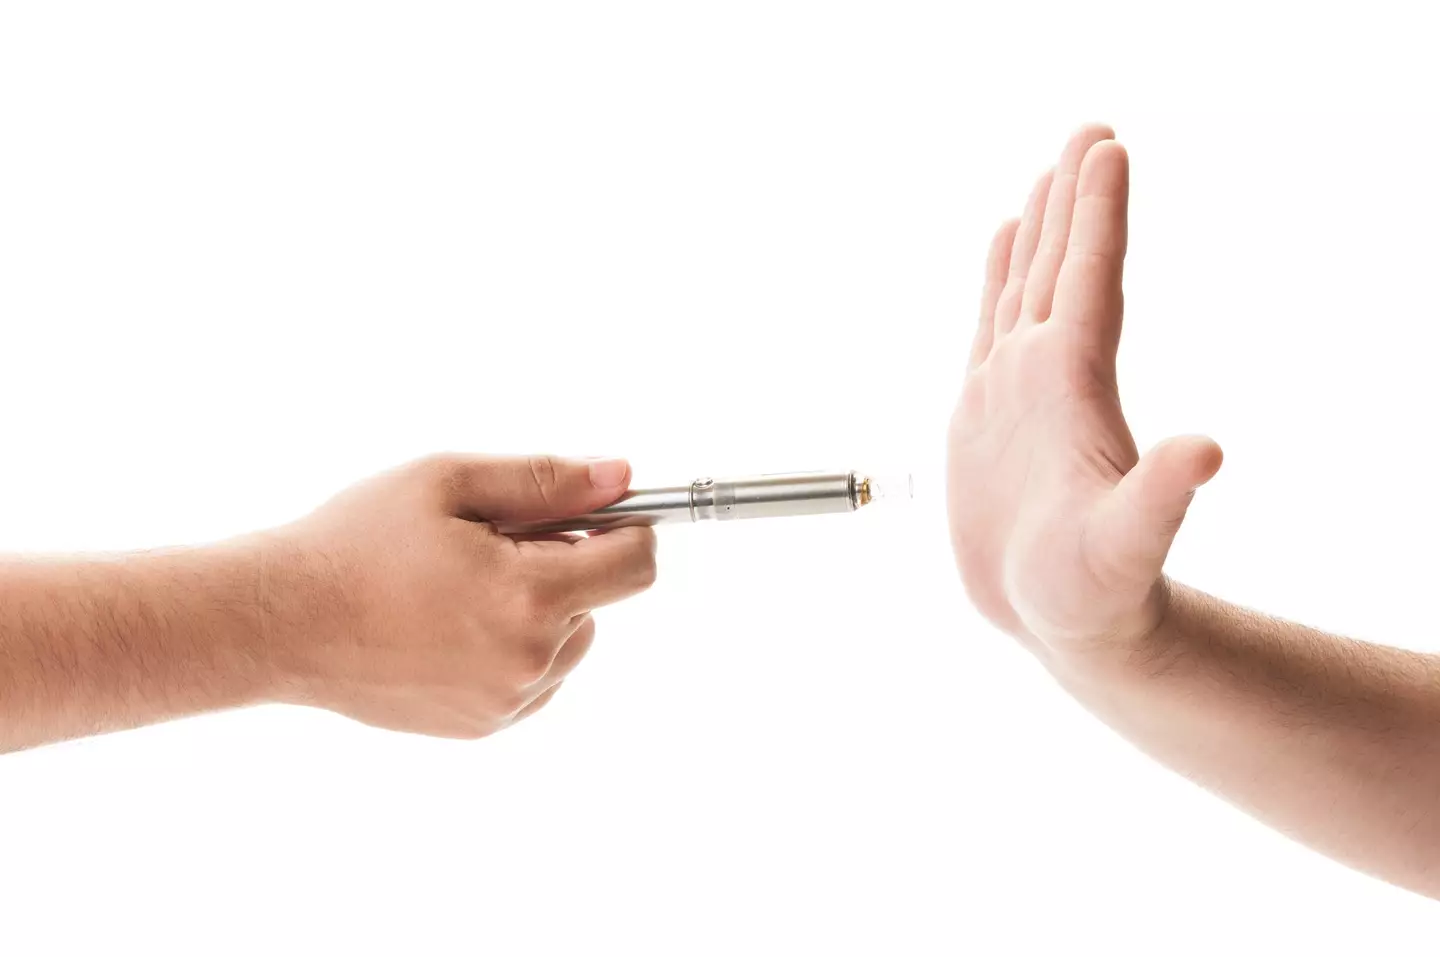 "Want a vape?" "Nah mate, all about the high fives these days."